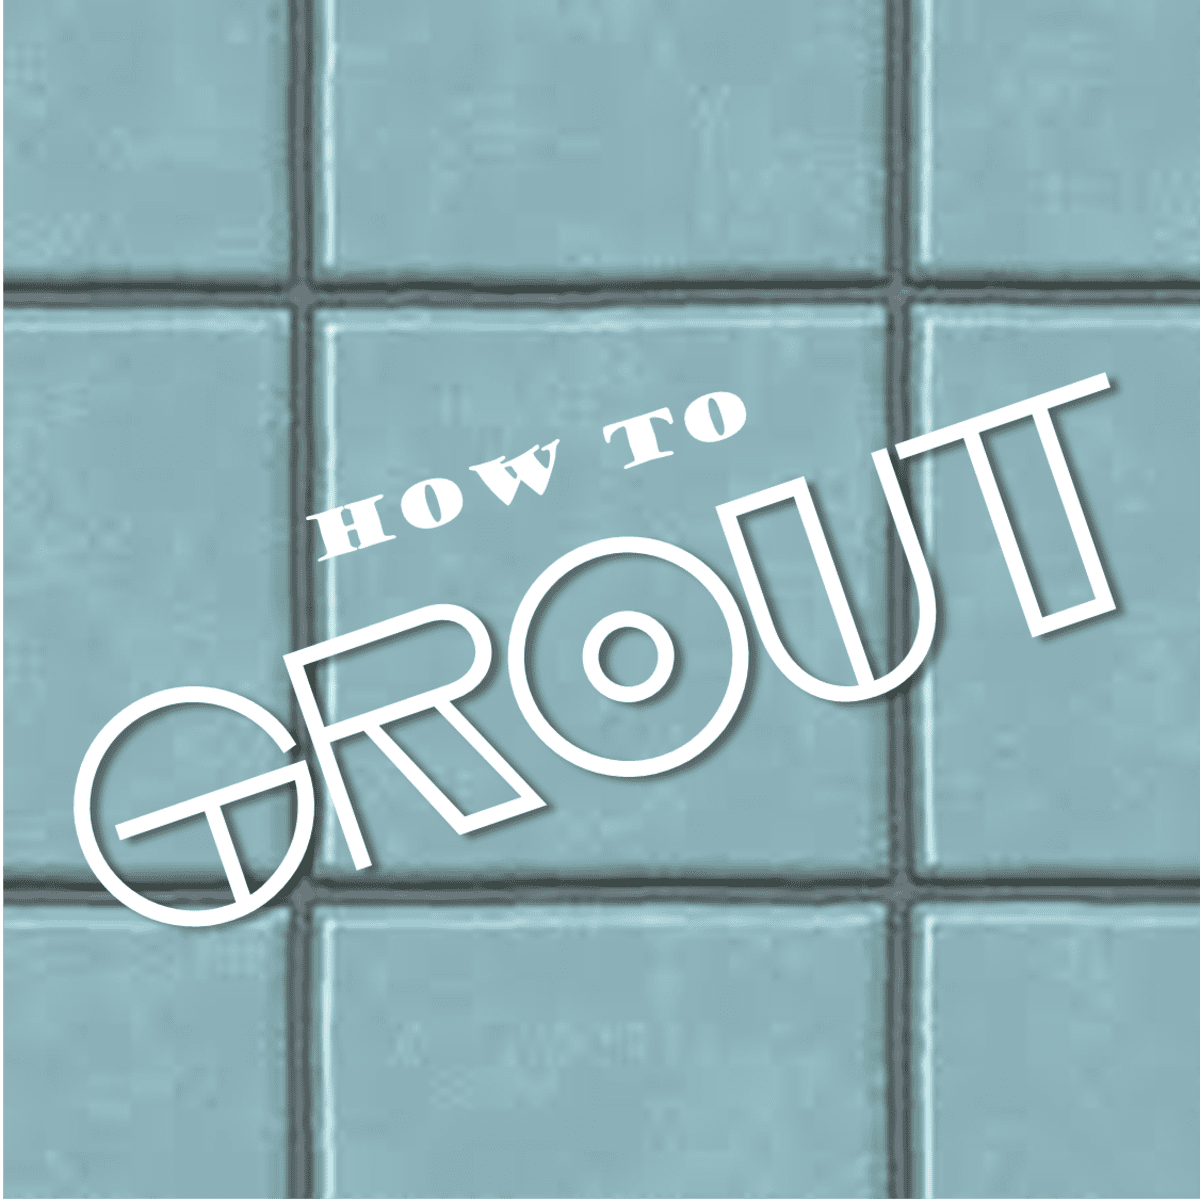 https://images.saymedia-content.com/.image/ar_1:1%2Cc_fill%2Ccs_srgb%2Cq_auto:eco%2Cw_1200/MTgwMjE2ODAwMDkxMzE3Mzcw/ceramic-tile-grout_learn_how-to-grout_successfully.png